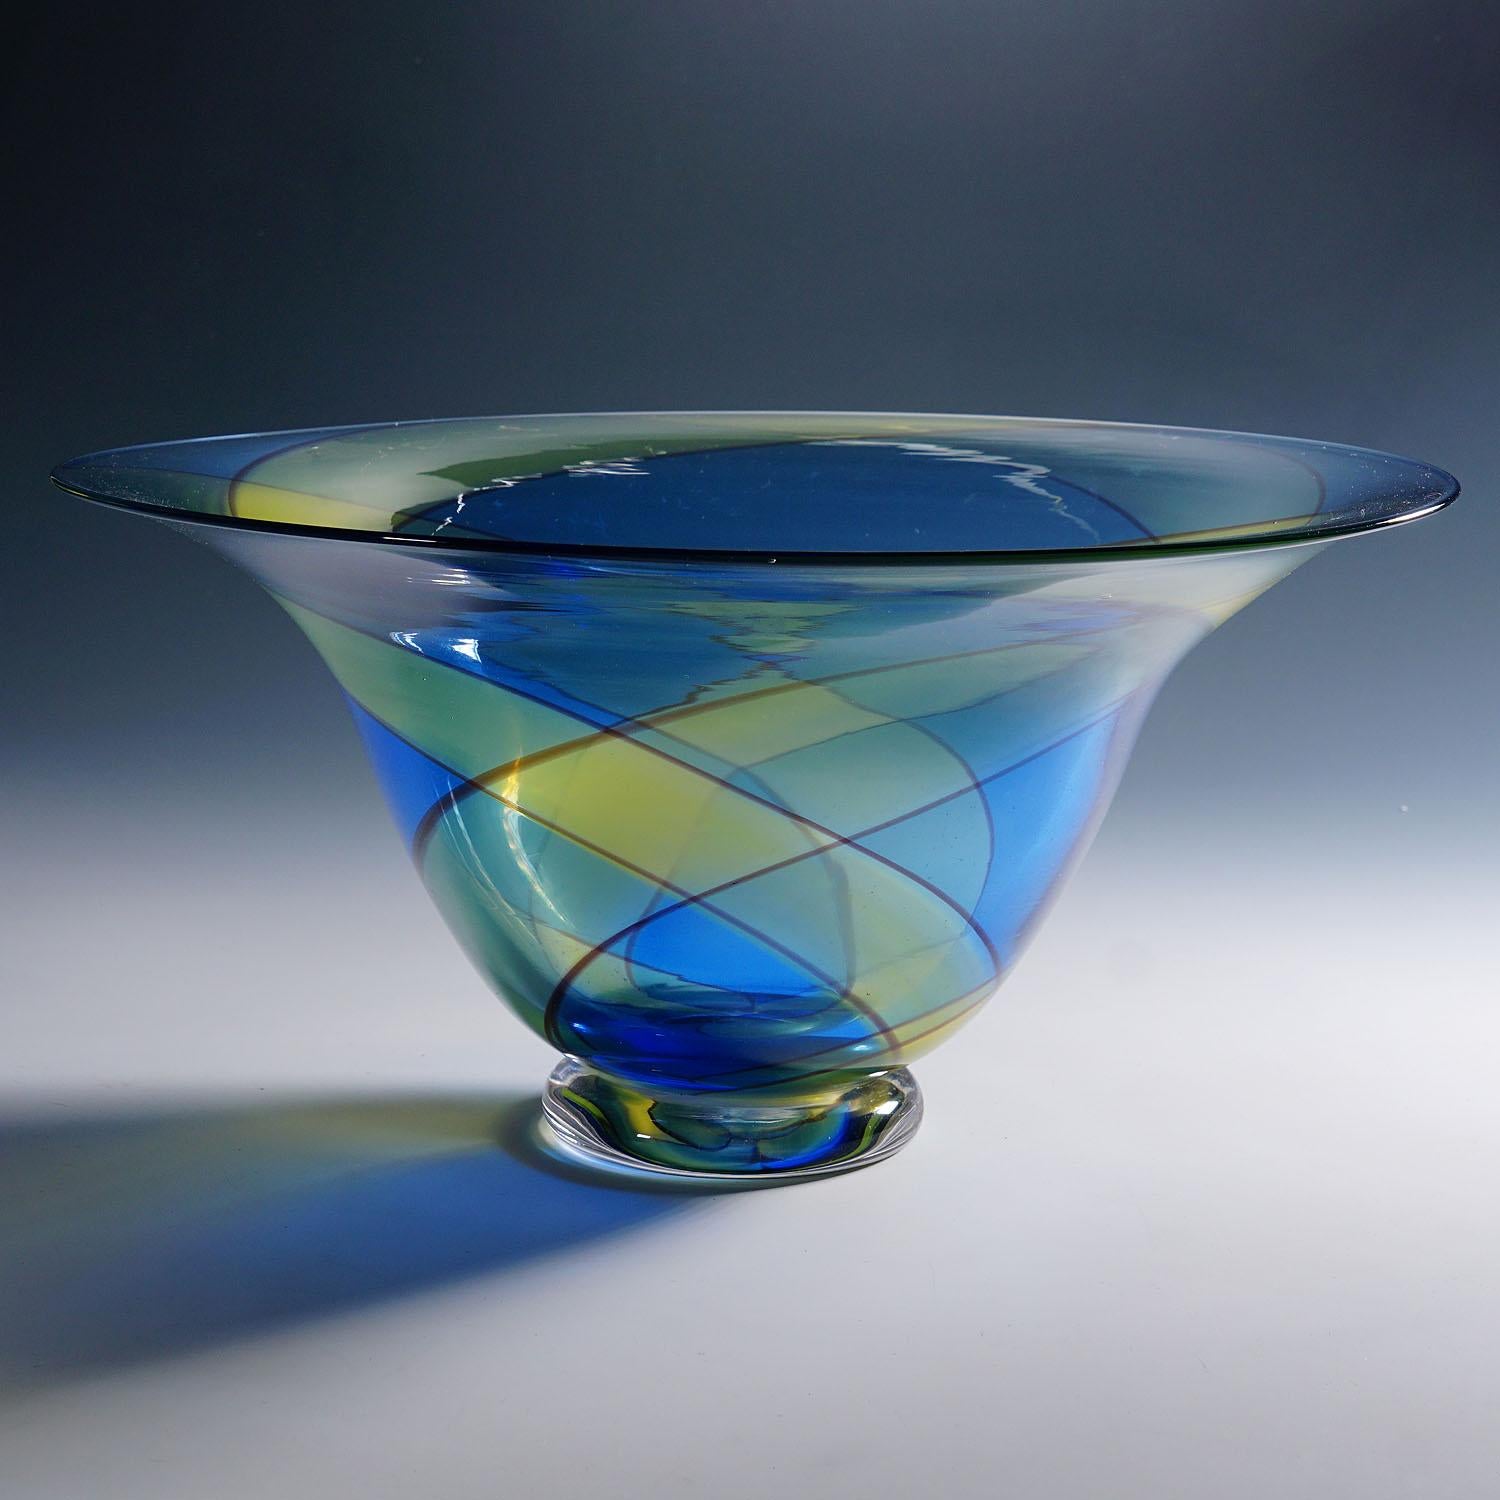 20th Century Large Carnevale Art Glass Bowl by Vetreria Archimede Seguso ca. 1980s For Sale